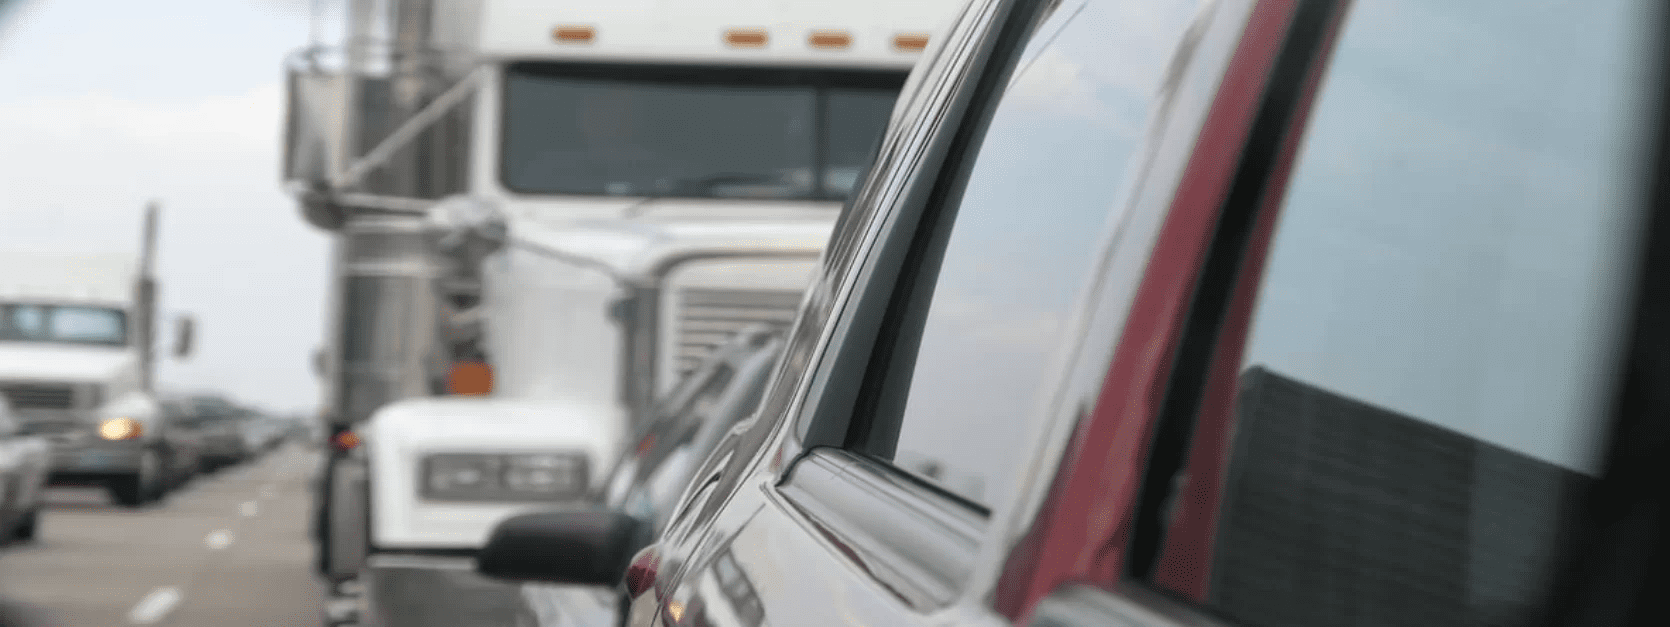 New York’s Pure Comparative Negligence Law Affect Your Truck Accident Case